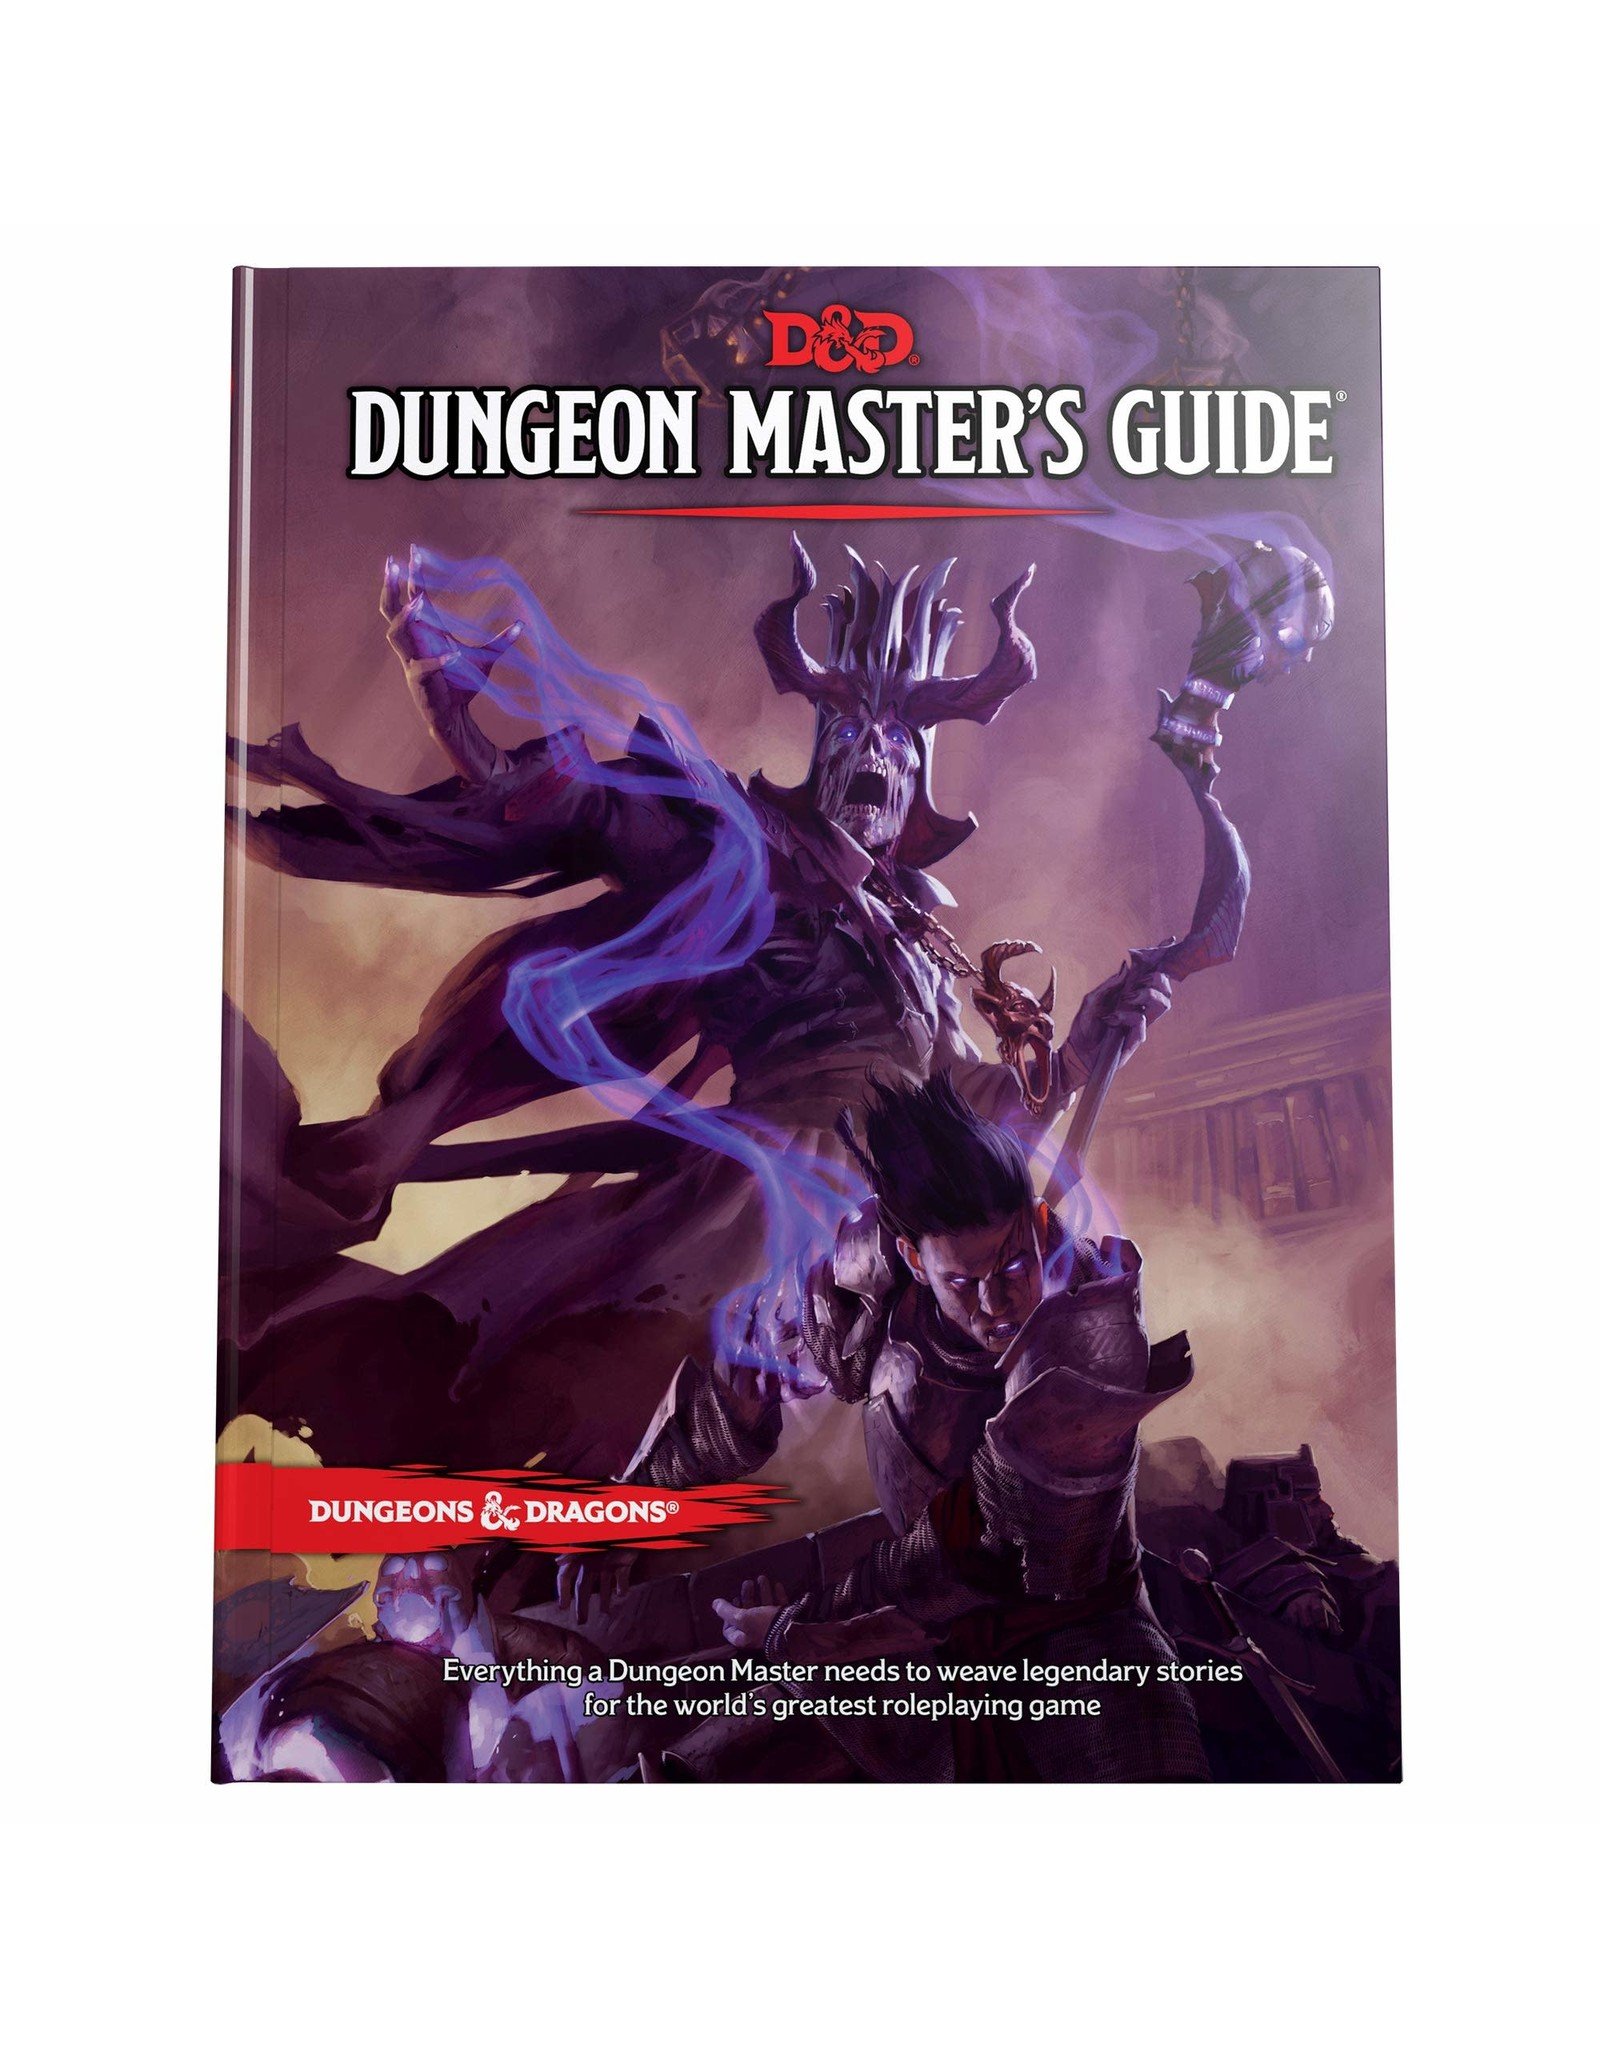 Dungeons & Dragons D&D - Dungeon Master's Guide